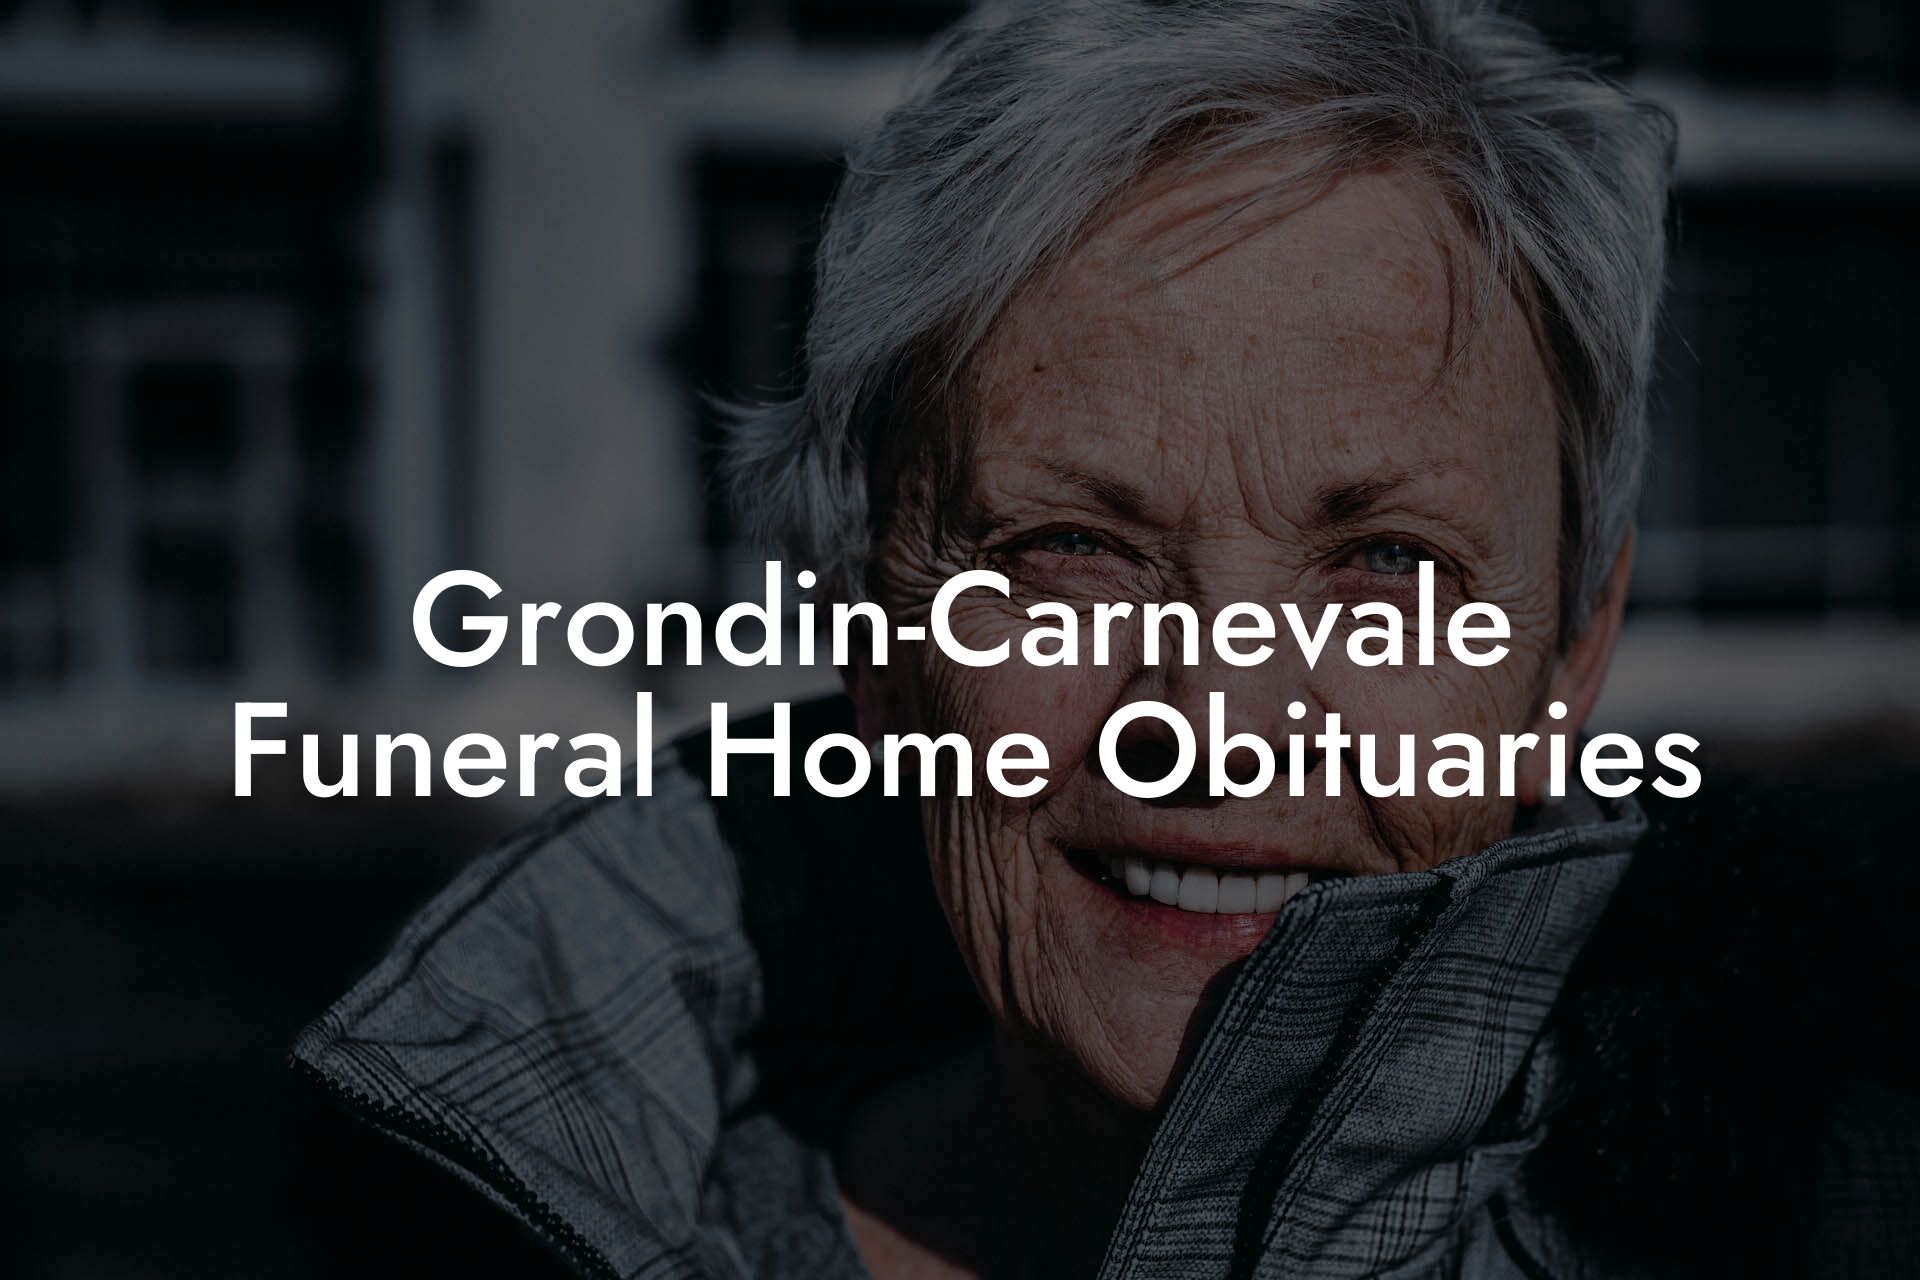 Grondin-Carnevale Funeral Home Obituaries